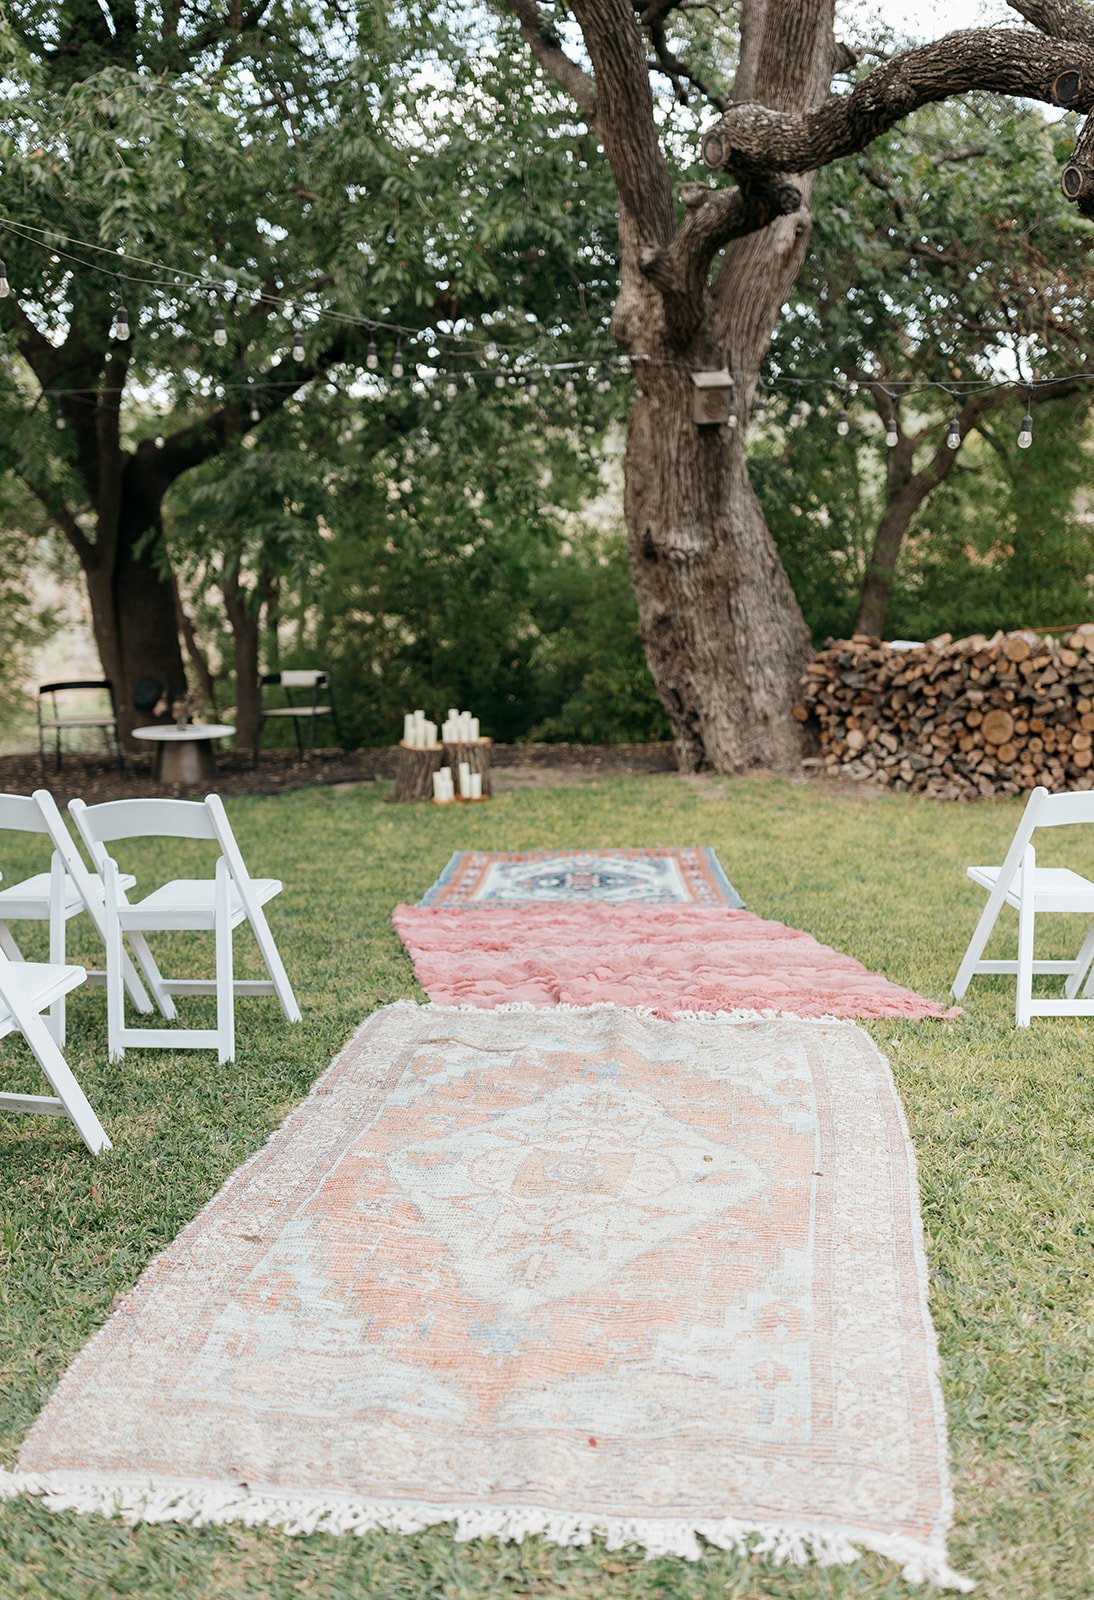 Bohemian-inspired rugs make up the aisle of the intimate outdoor wedding location